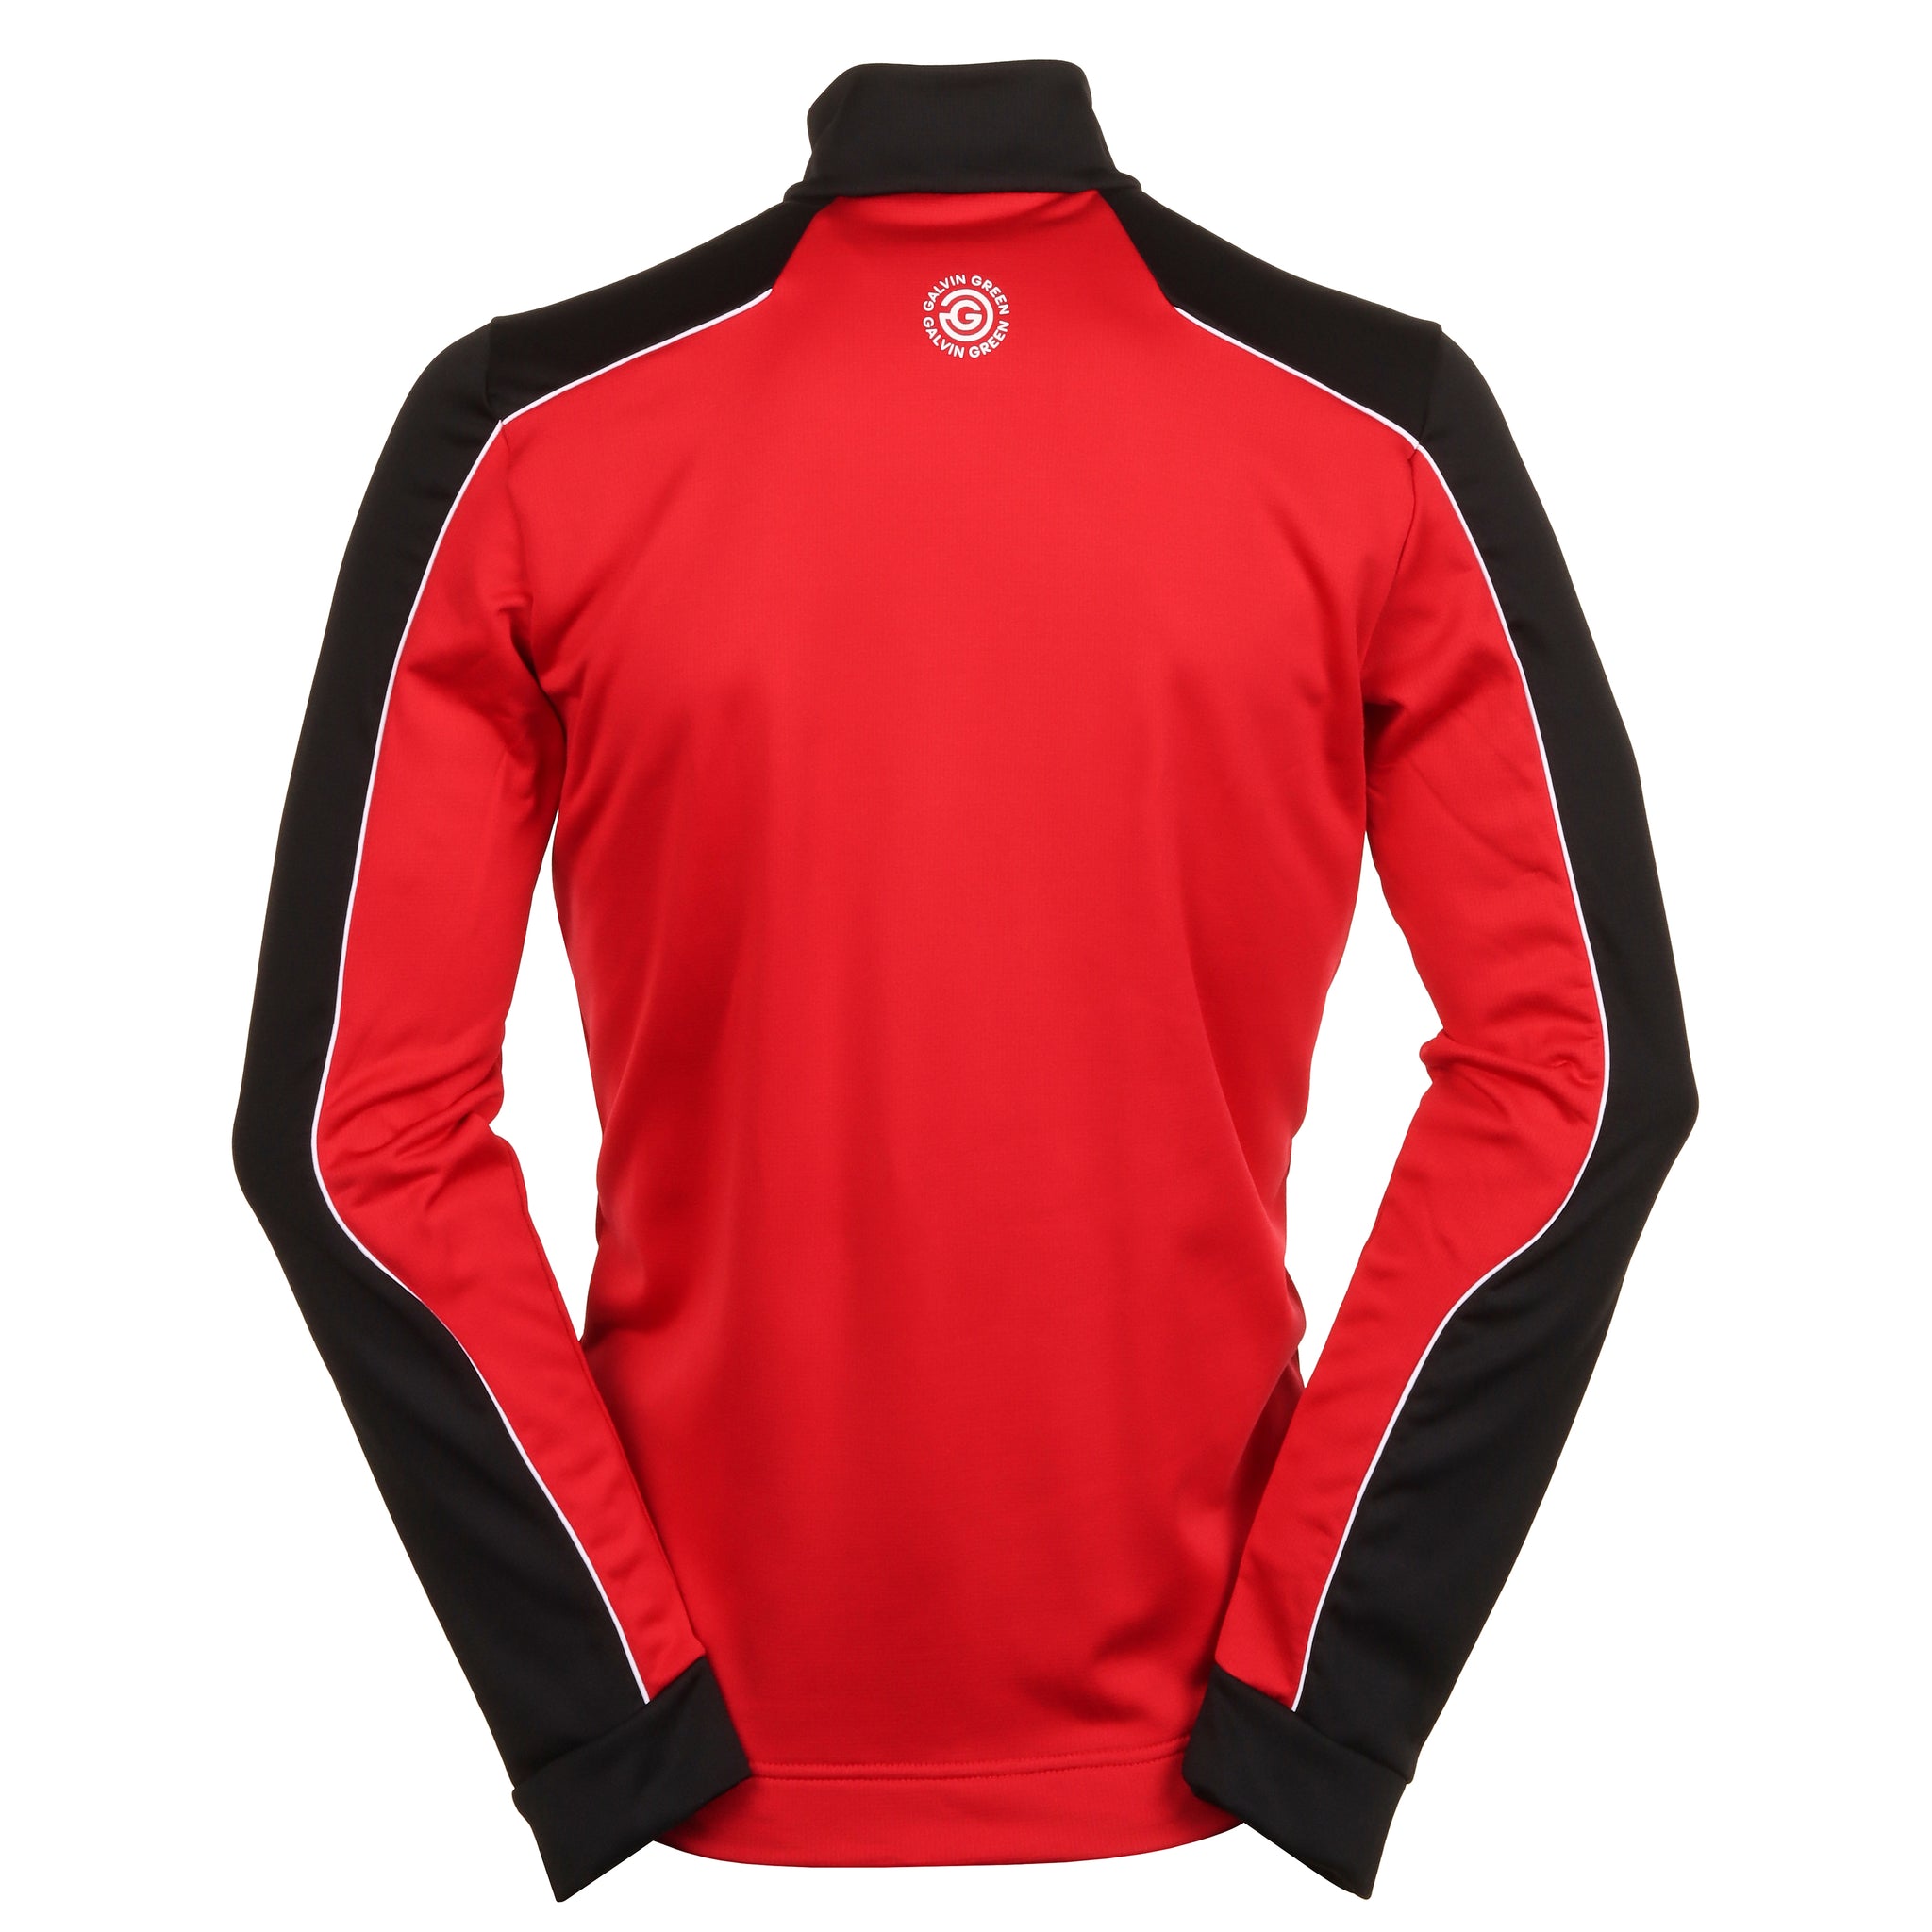 galvin-green-dave-insula-golf-pullover-red-black-9785